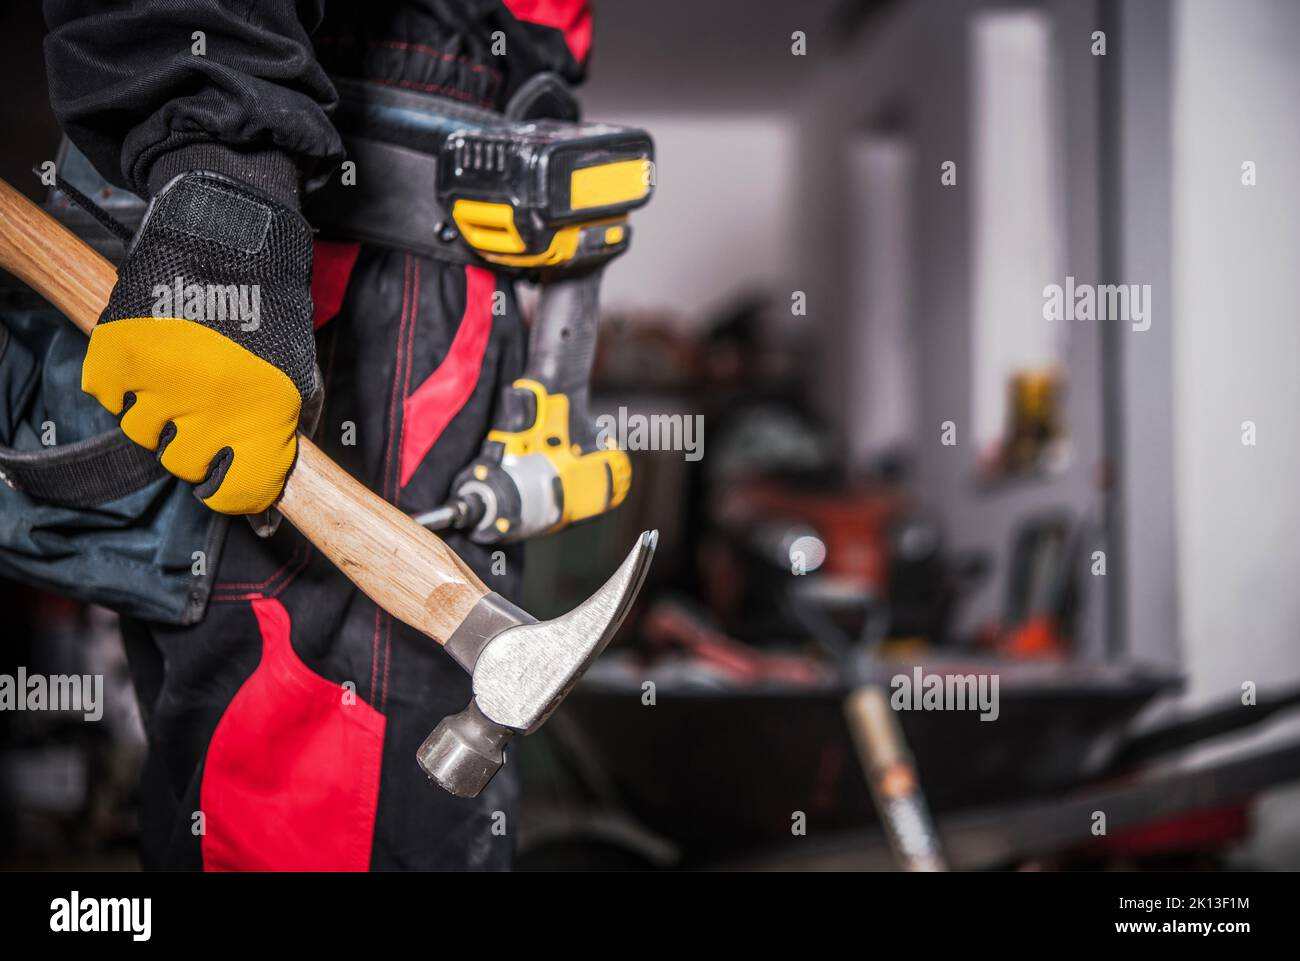 Closeup of Construction Worker Holding a Hammer in His Right Hand. Electric Screwdriver Hanging on a Tool Belt in the Background. Professional Buildin Stock Photo